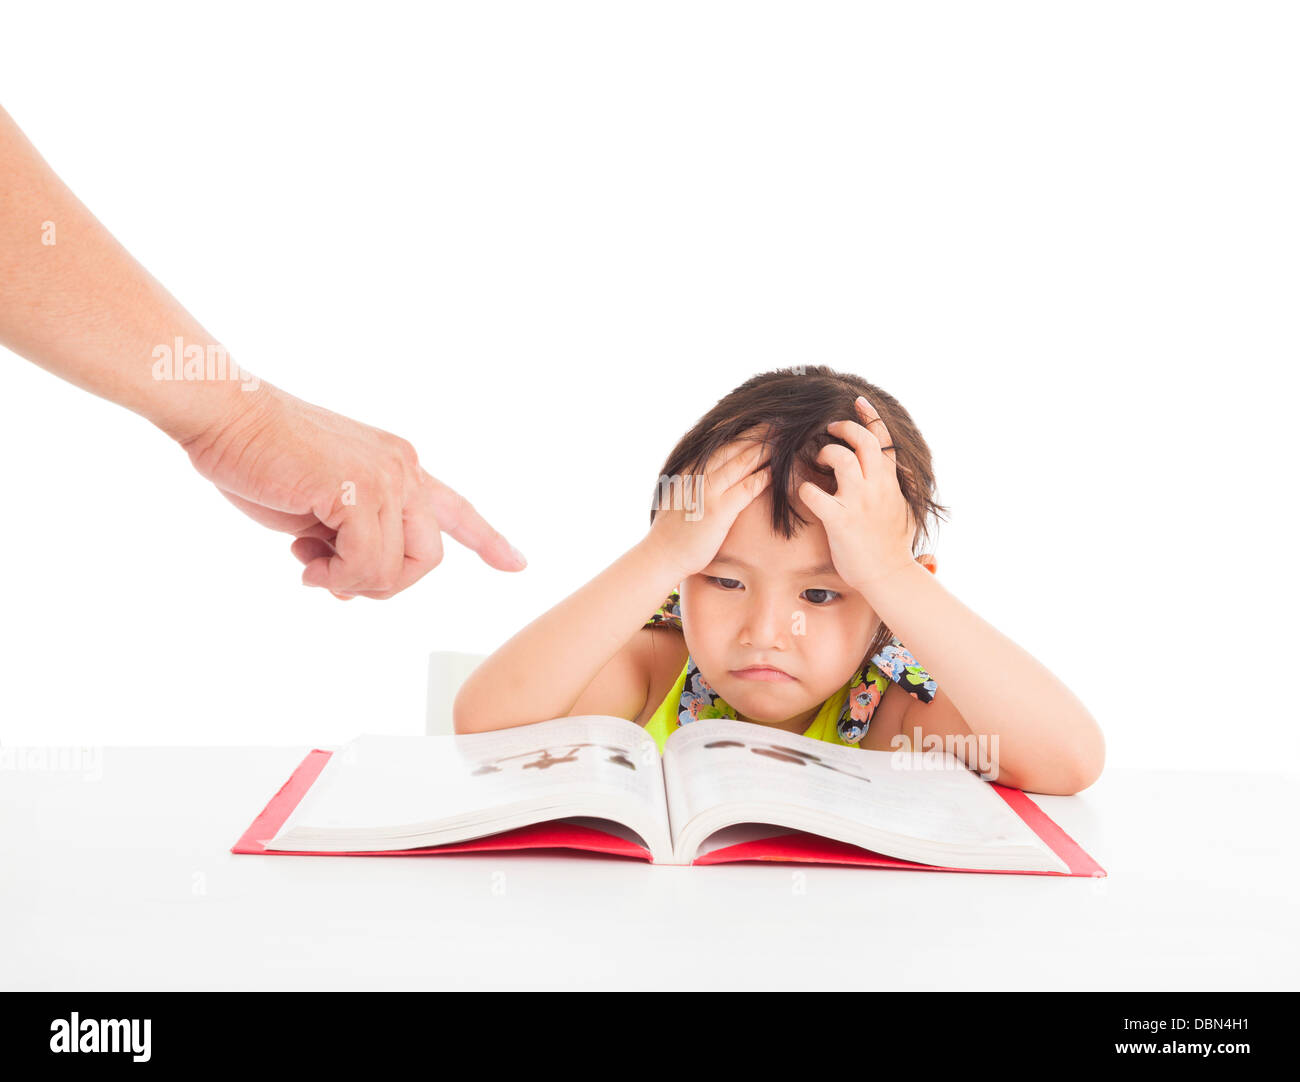 finger pointing to Angry and tired little girl studying Stock Photo